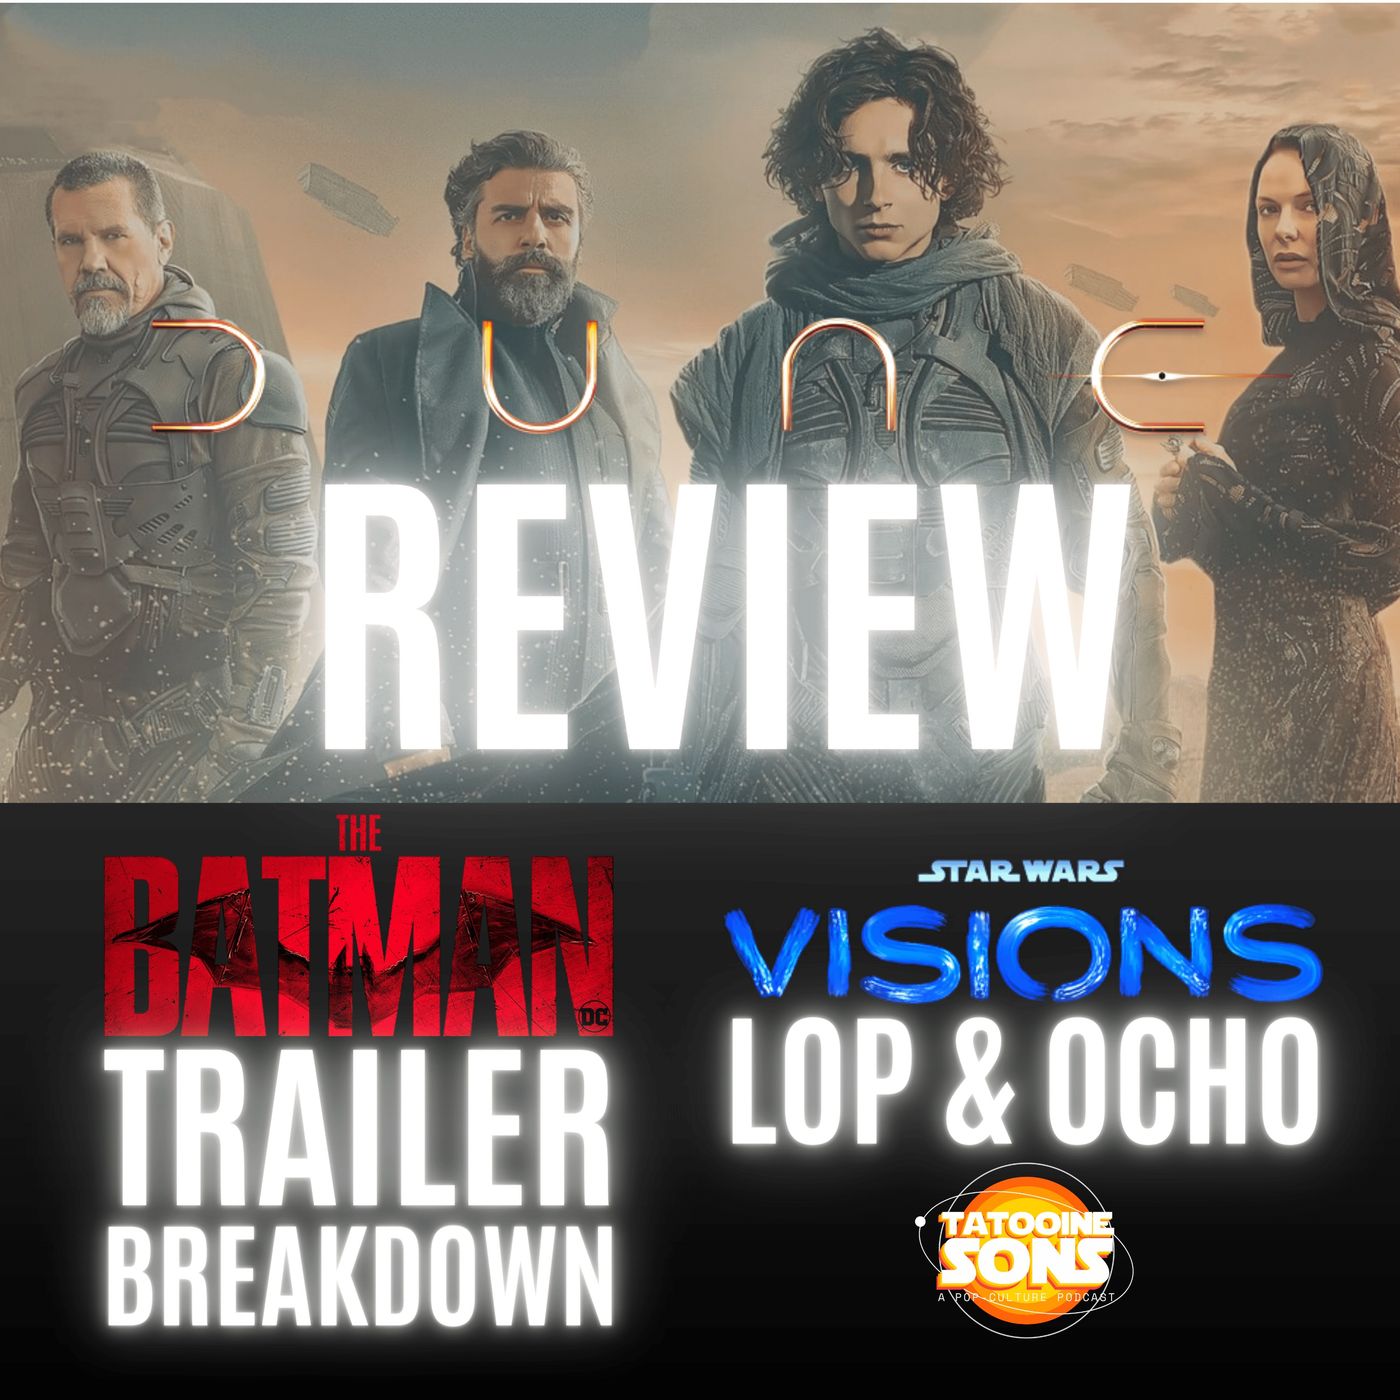 Dune Review | The Batman Trailer Breakdown | Star Wars Visions - Lop and Ocho